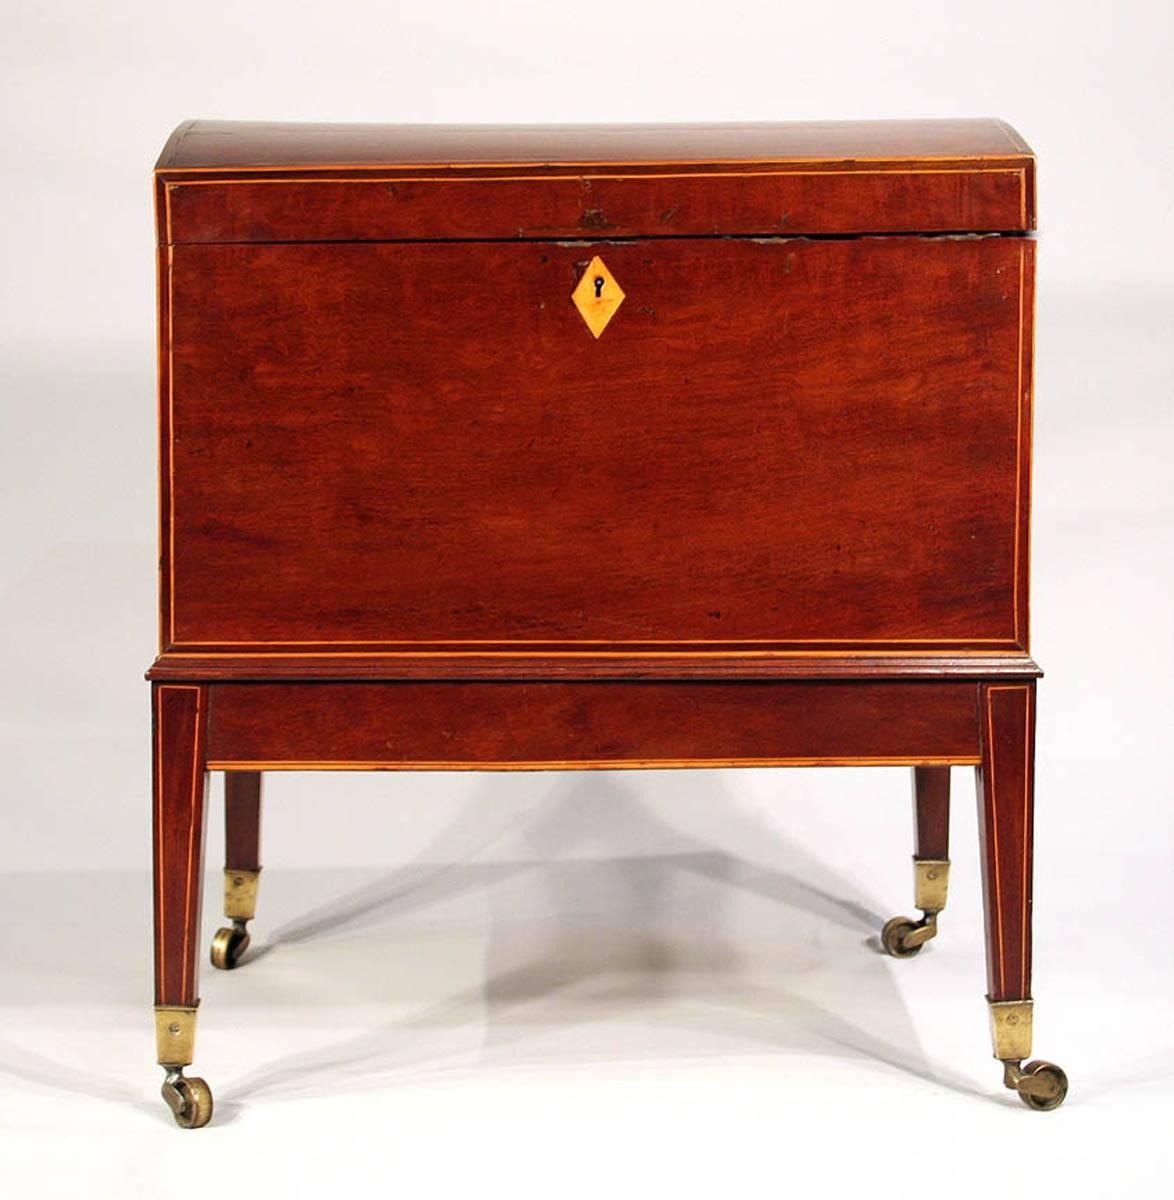 

Fine English Hepplewhite domed top cellerette in mahogany with satinwood
stringing, having tapered legs ending in brass castors,
circa 1790 (interior dividers are later).

Provenance:
Eveleth/ Summerford Estate,
Washington,